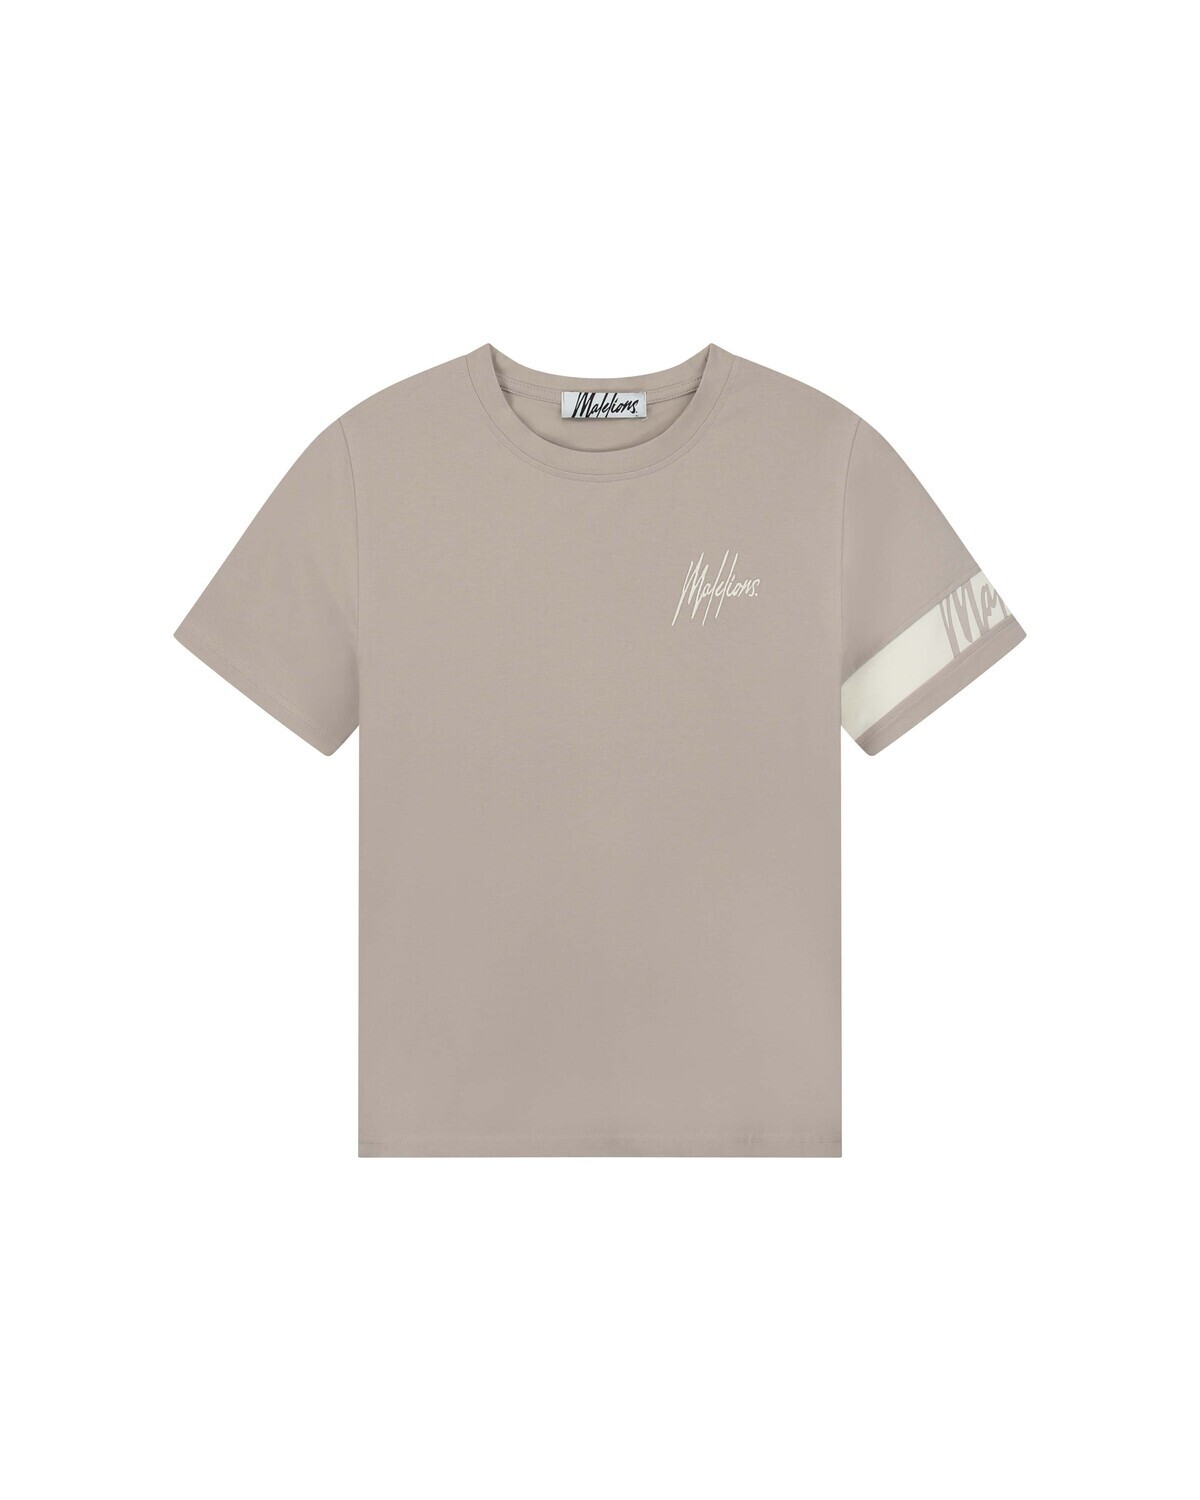 Captain T-Shirt Women Taupe/Offwhite